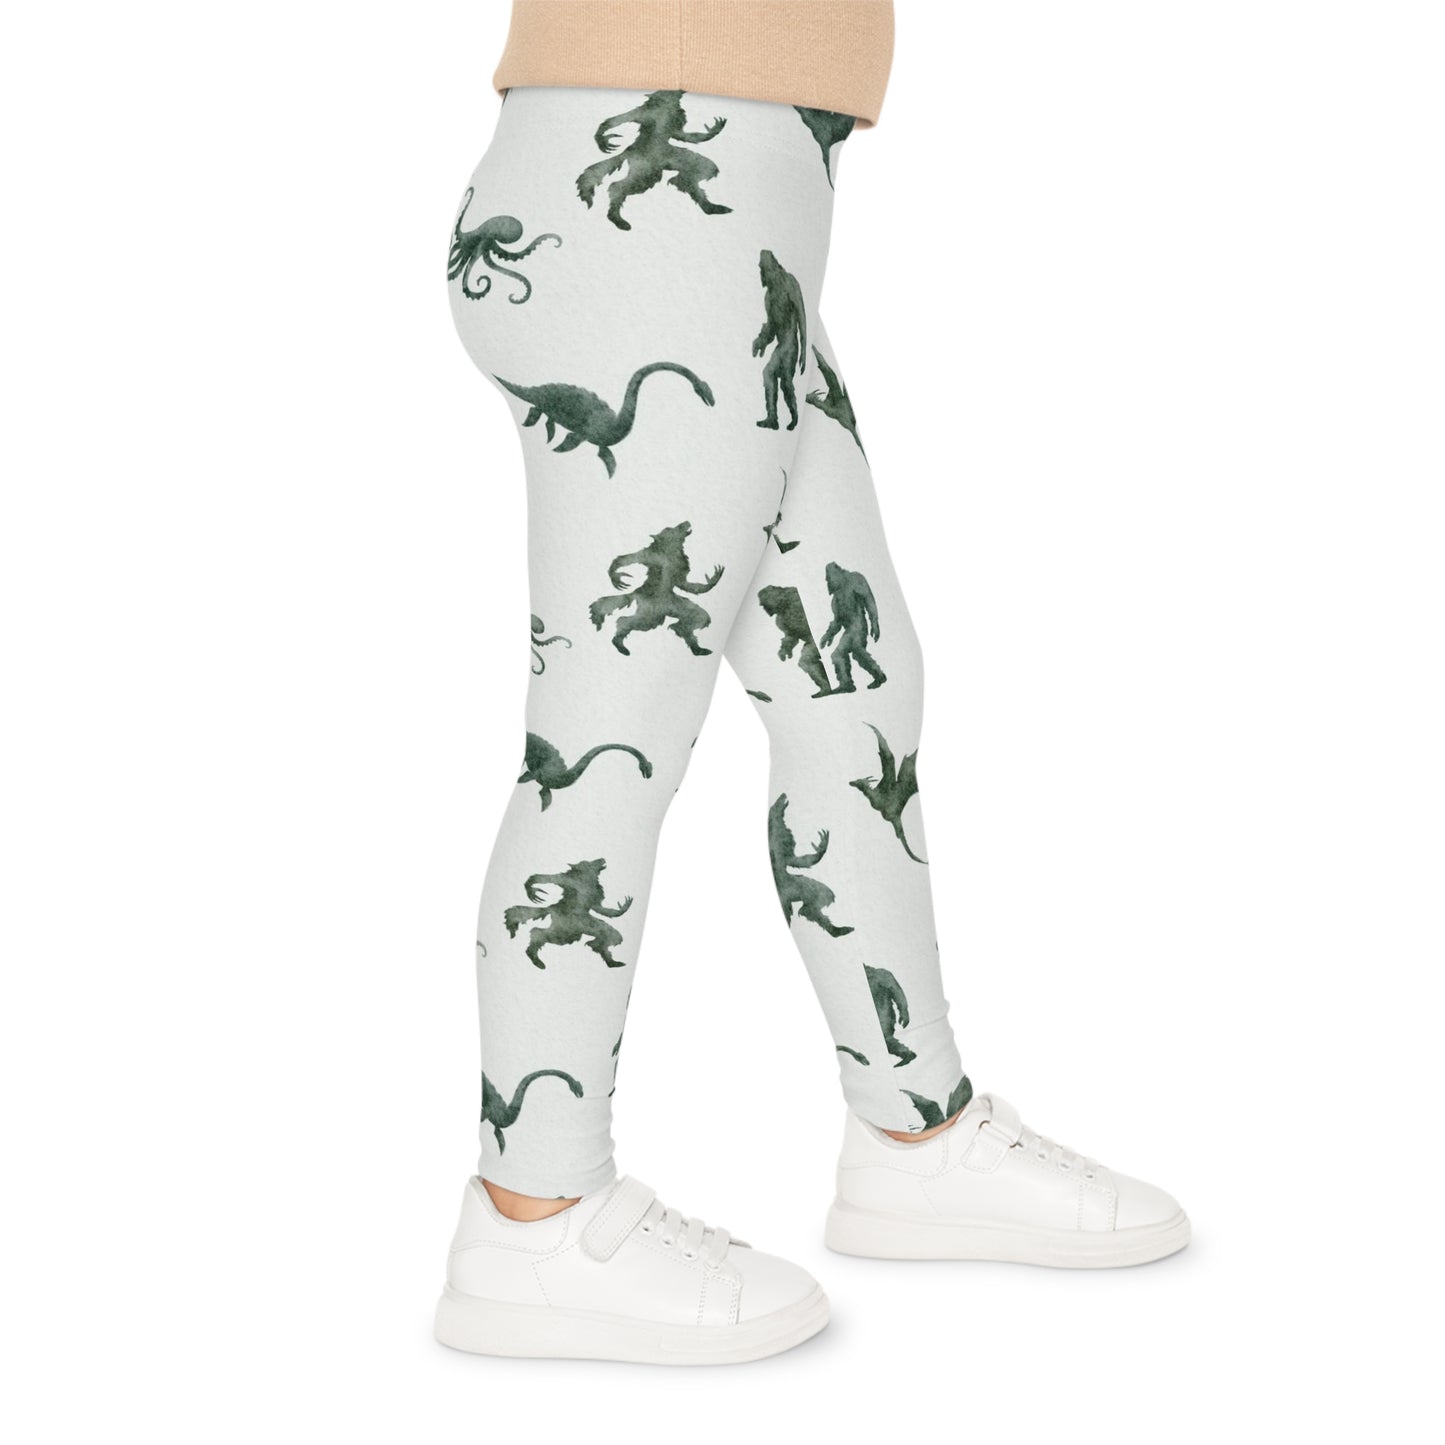 Mythical Creatures Kids Leggings